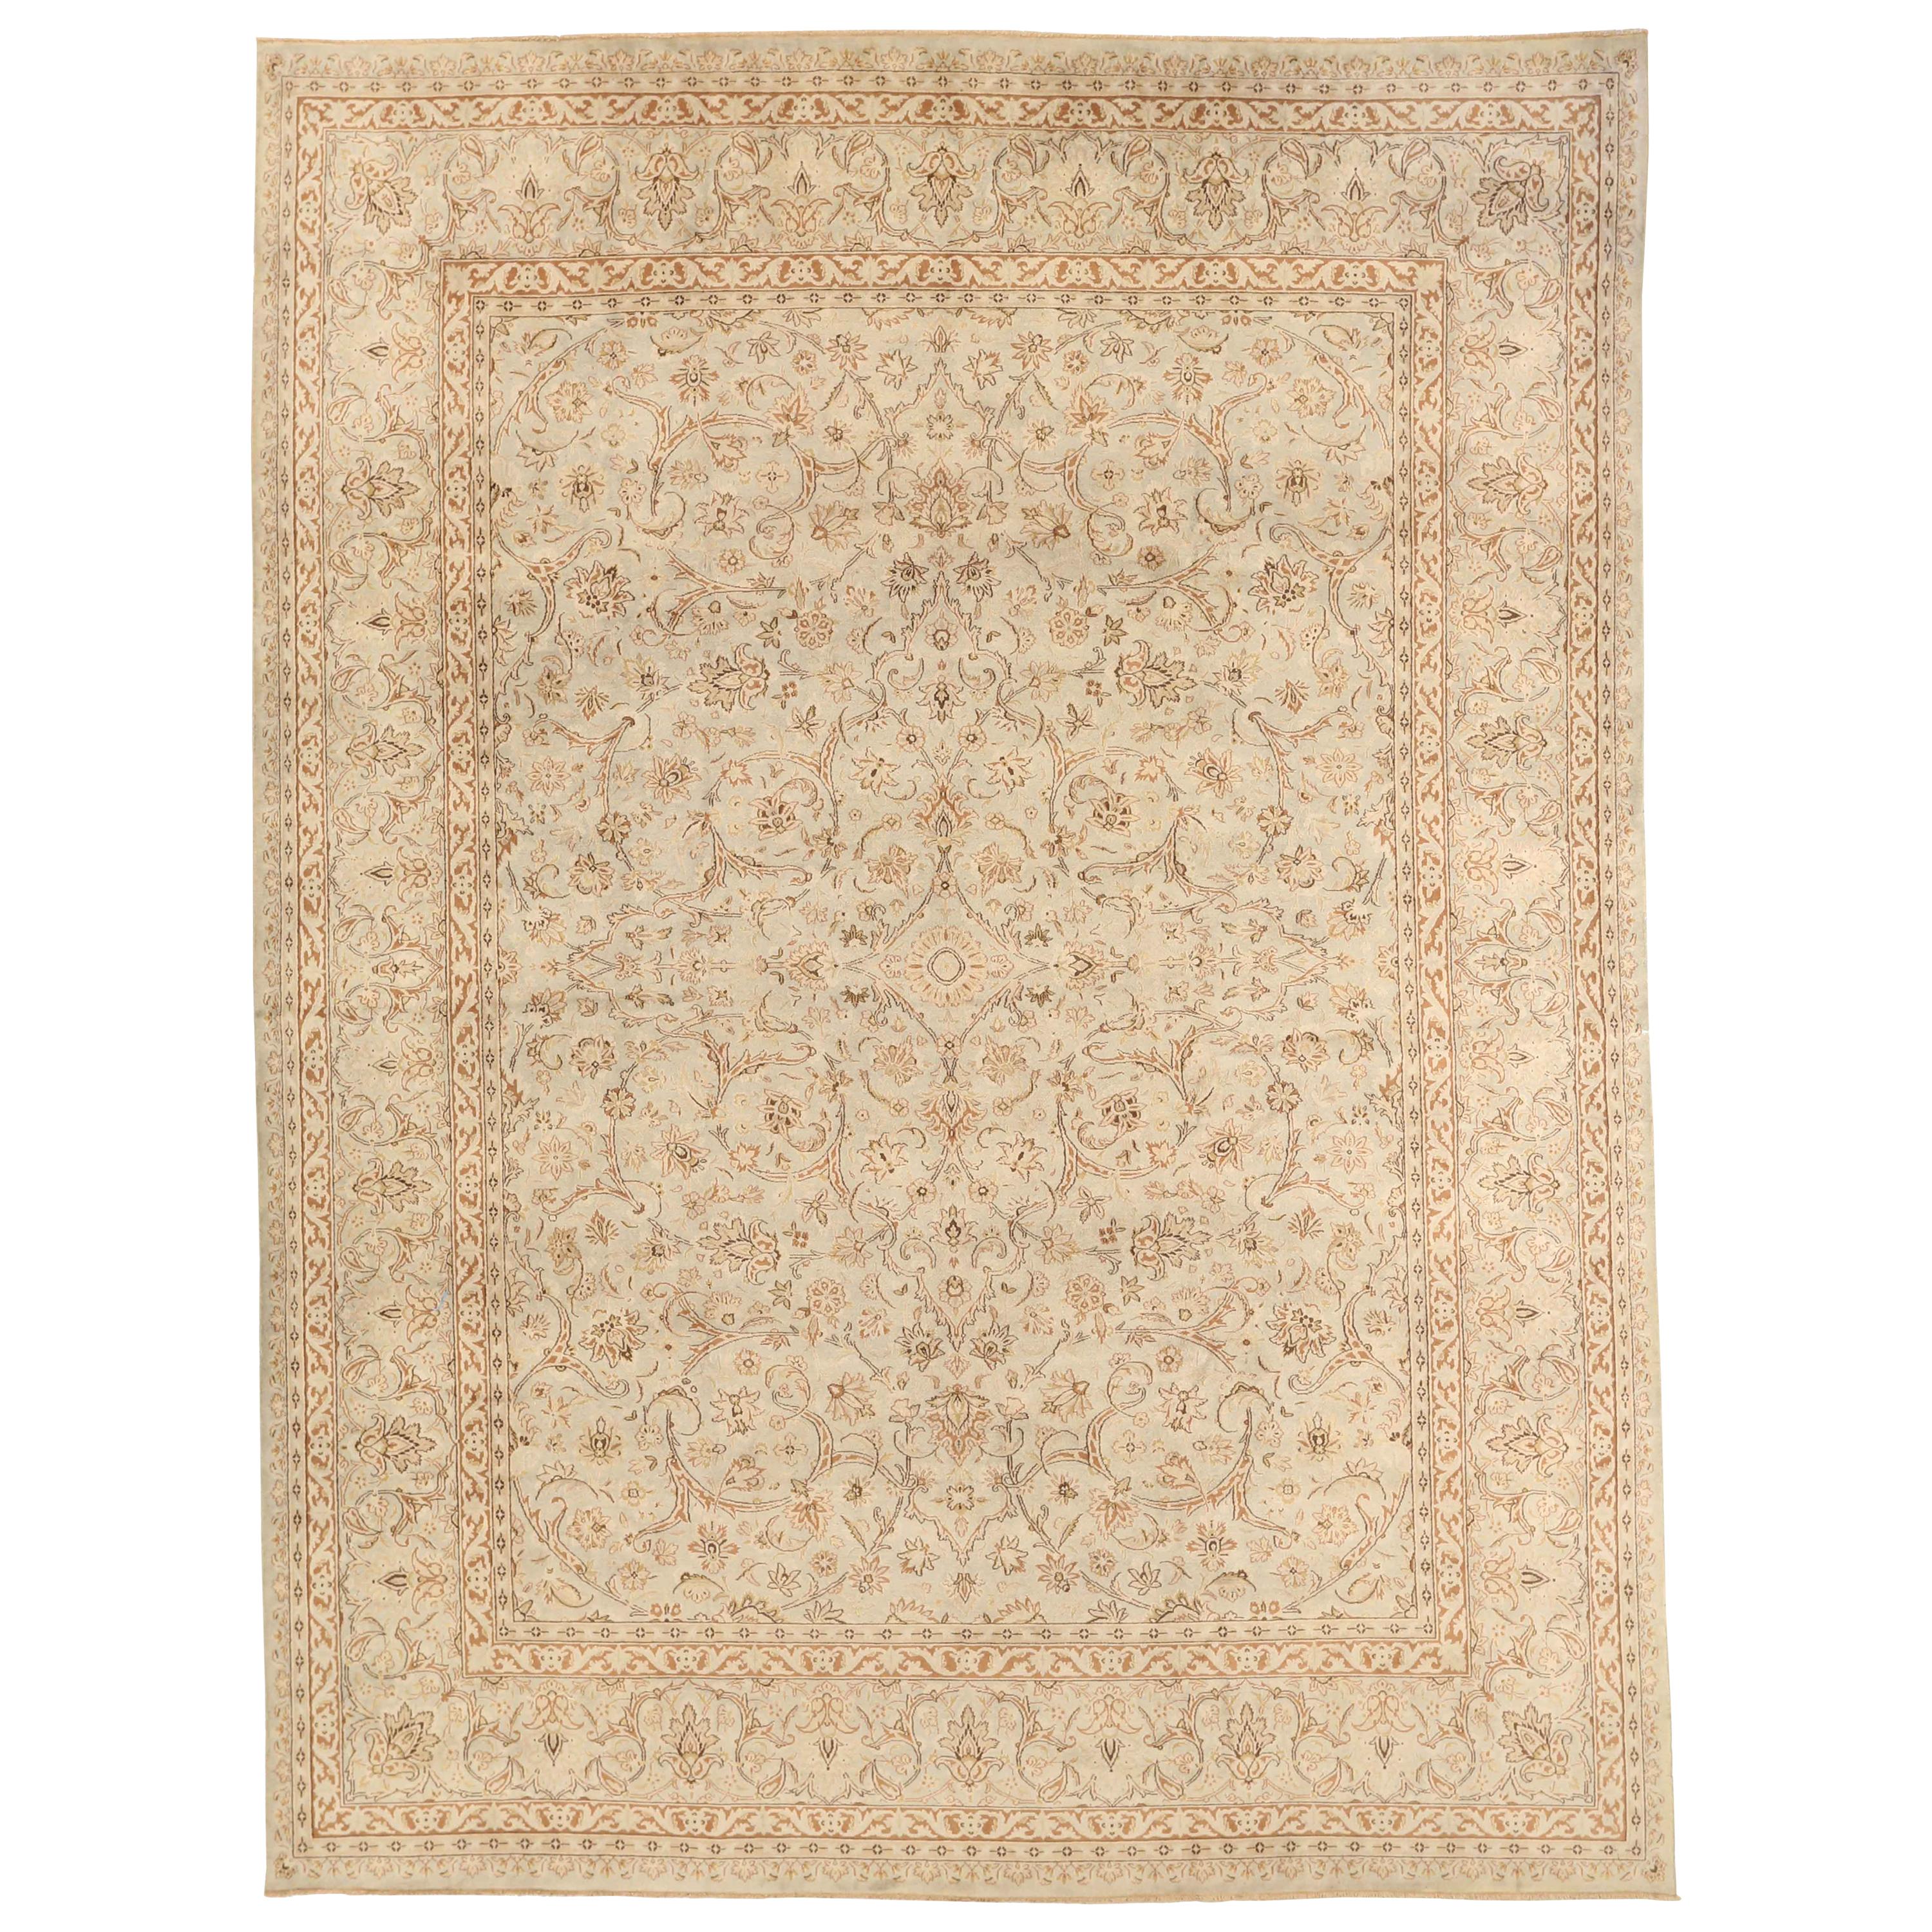 1940s Antique Persian Kerman Rug with Ivory and Brown Flower Details over Beige